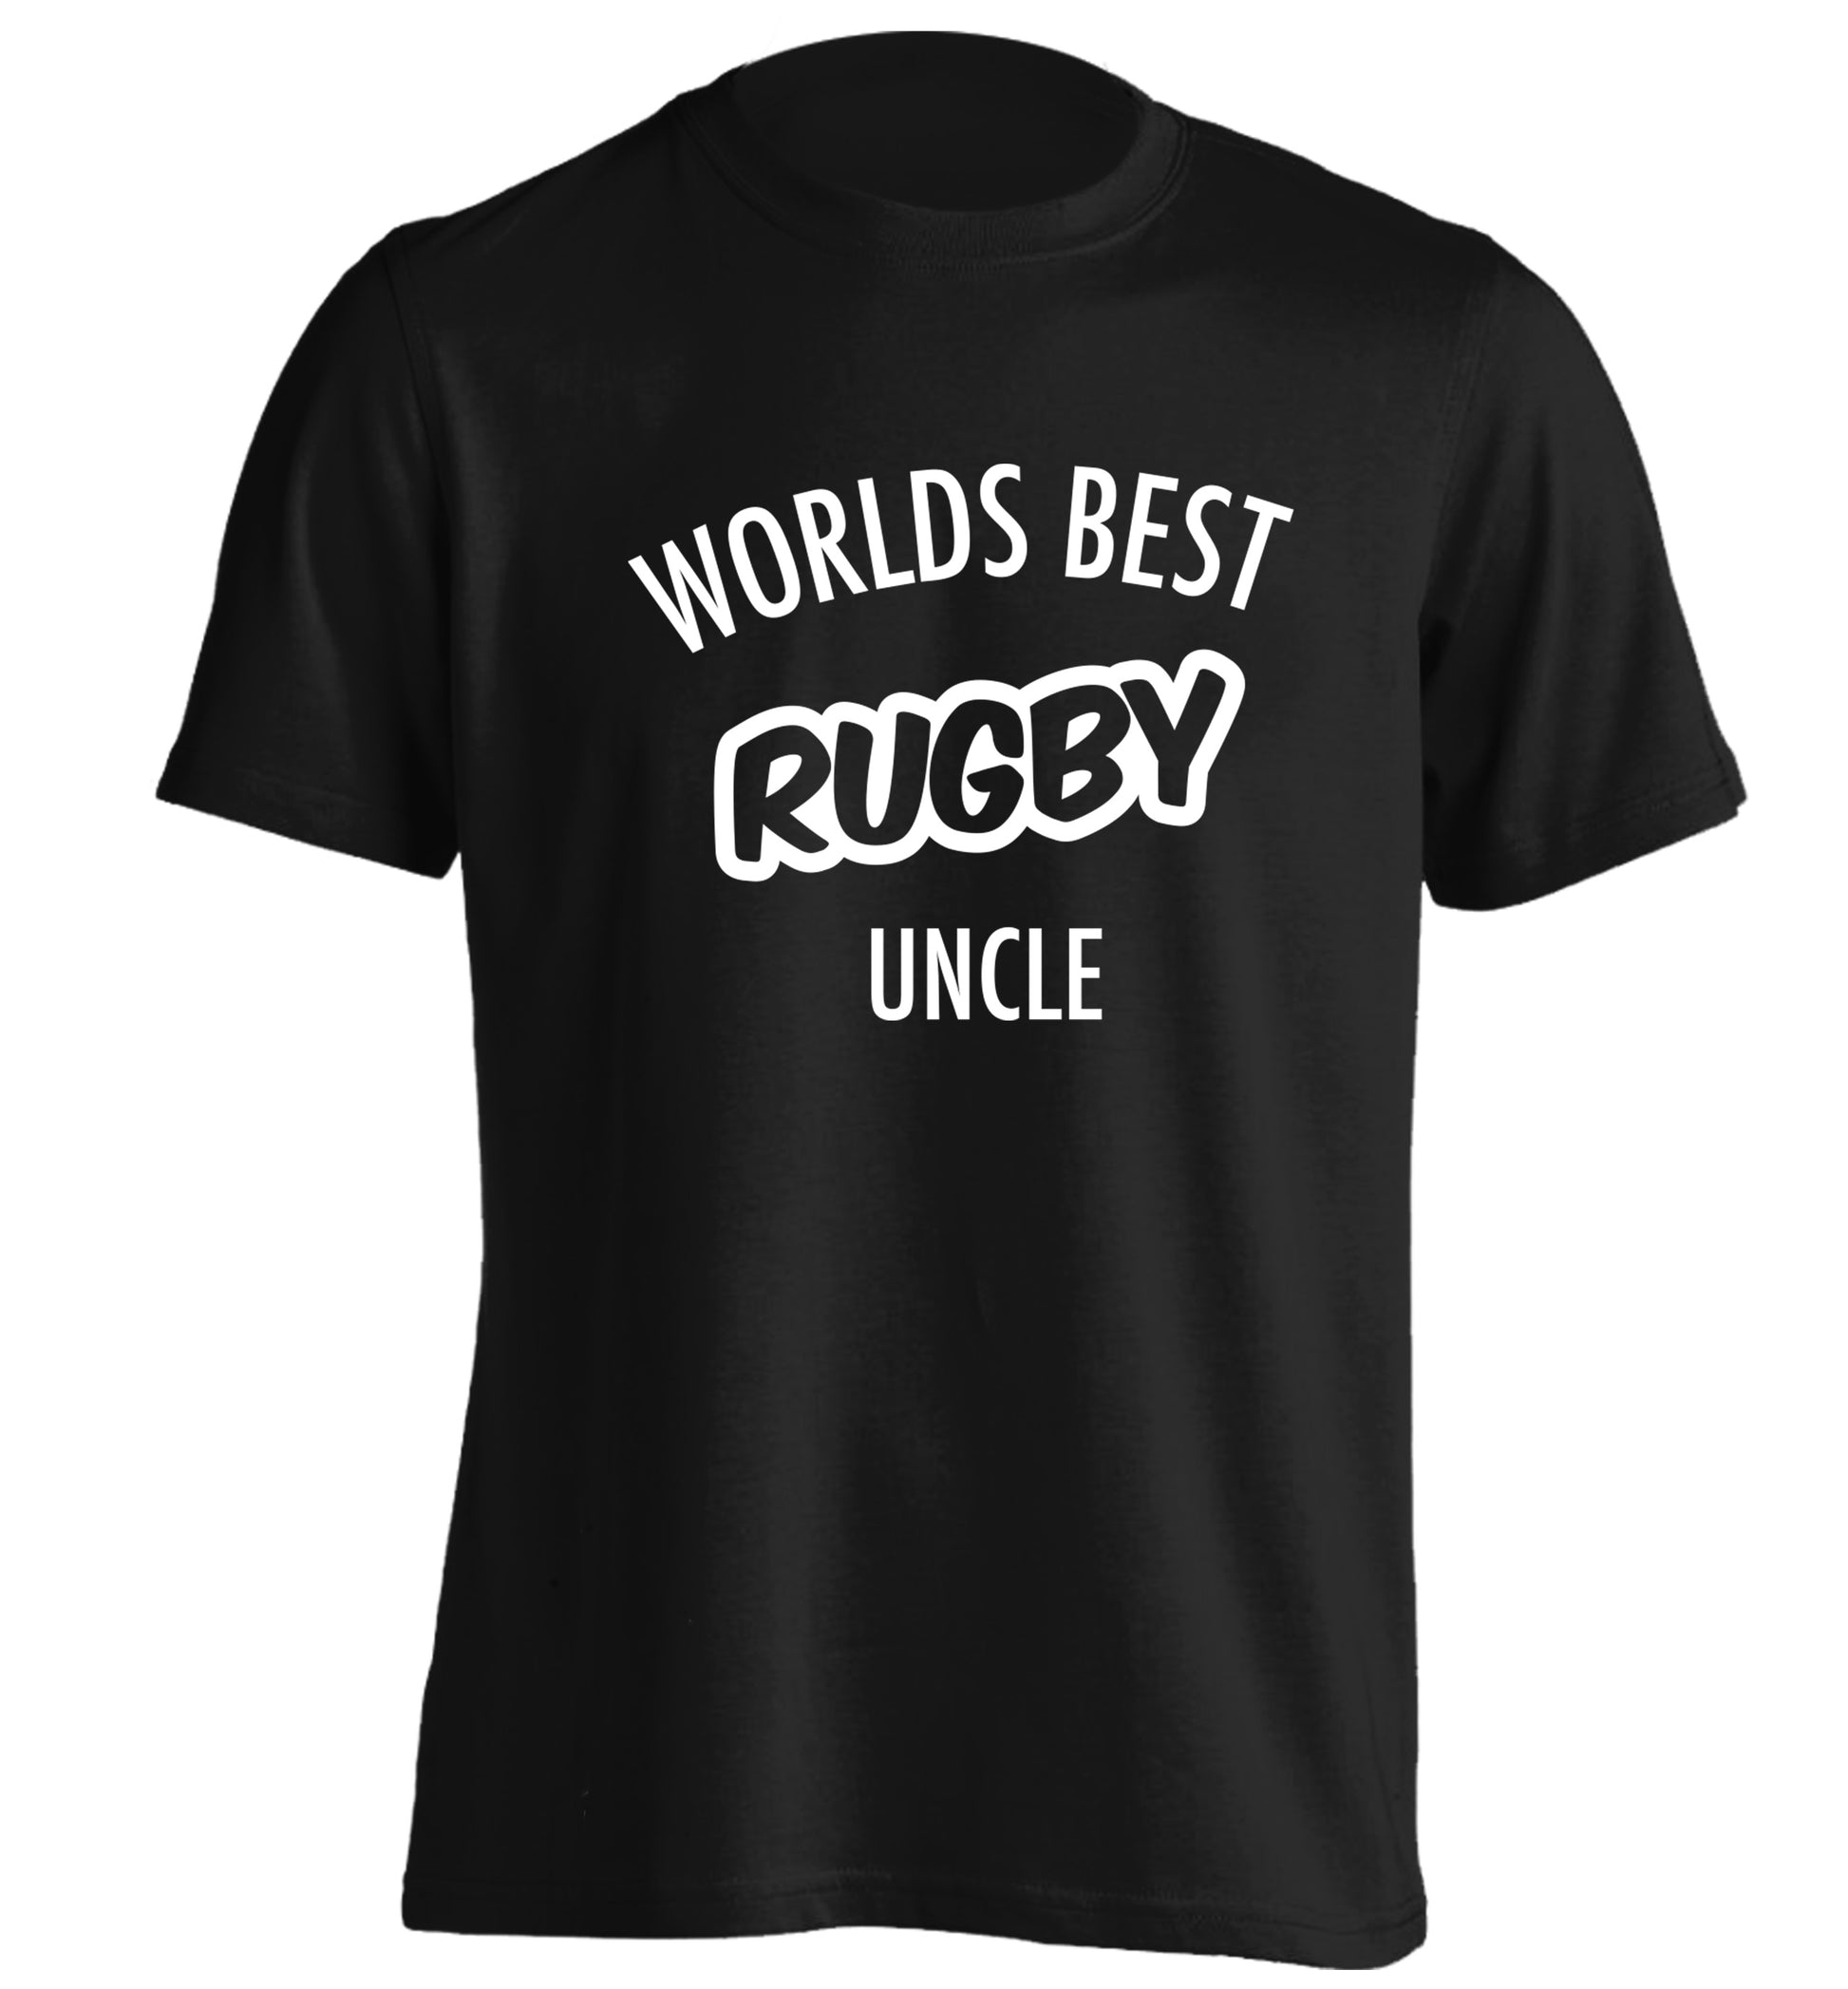 Worlds best rugby uncle adults unisex black Tshirt 2XL